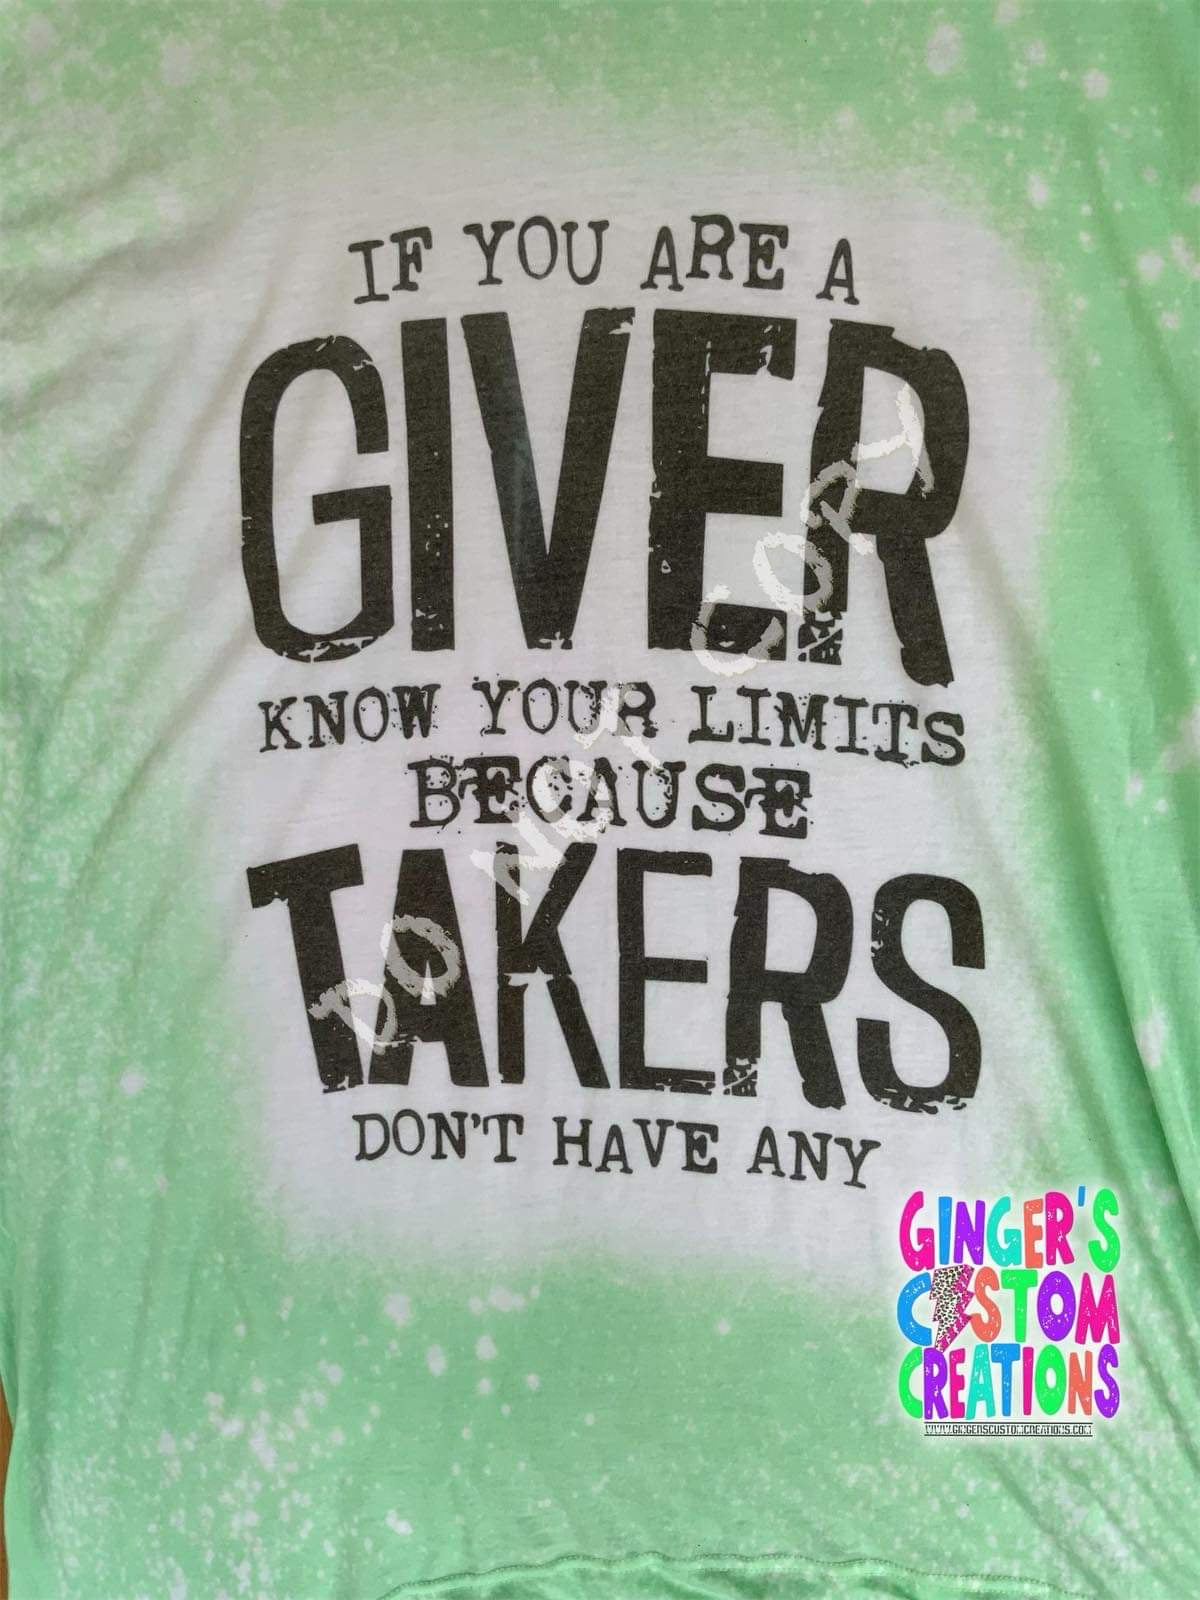 If you are a giver know your limits  - BLEACHED TSHIRT